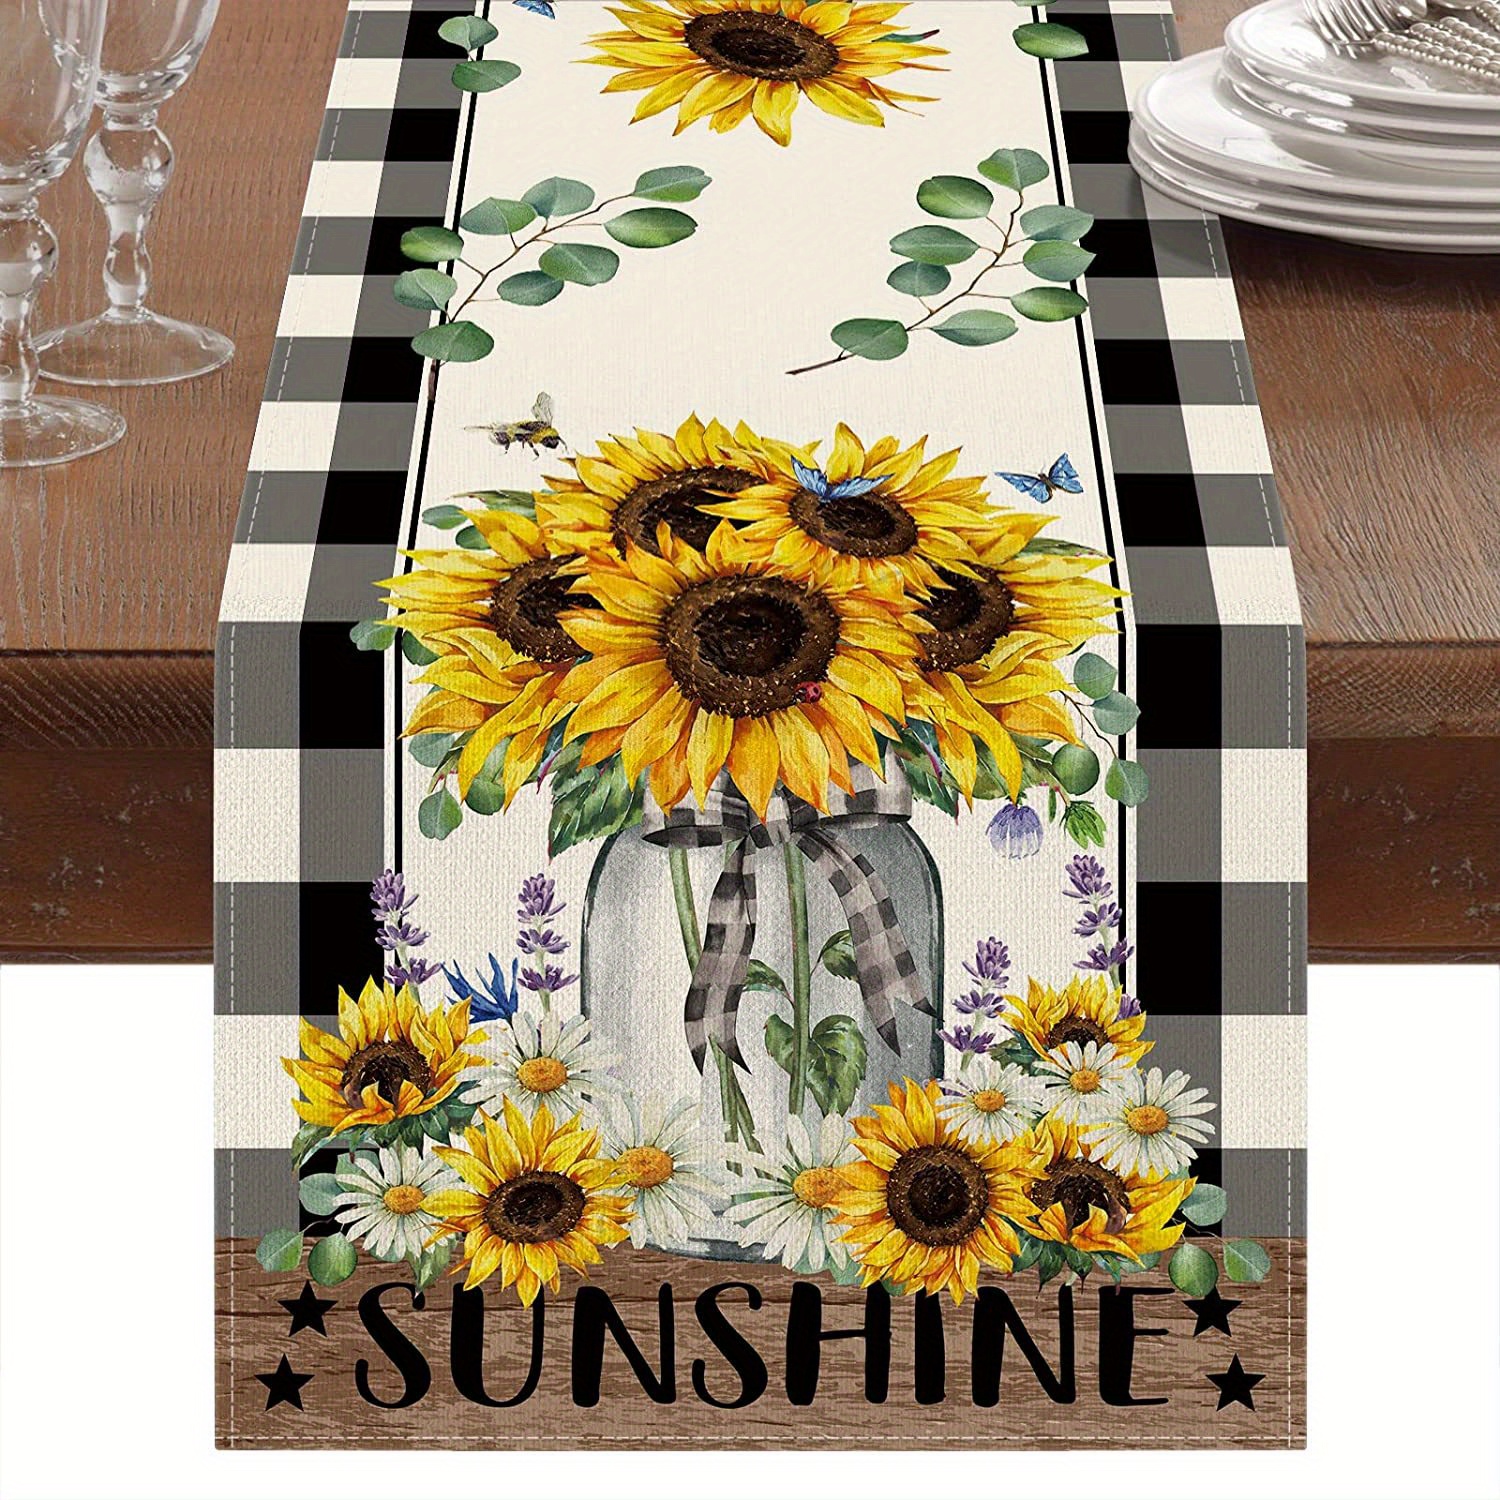 Sunflower Tablecloth Black and White Checkered Tablecloth Floral